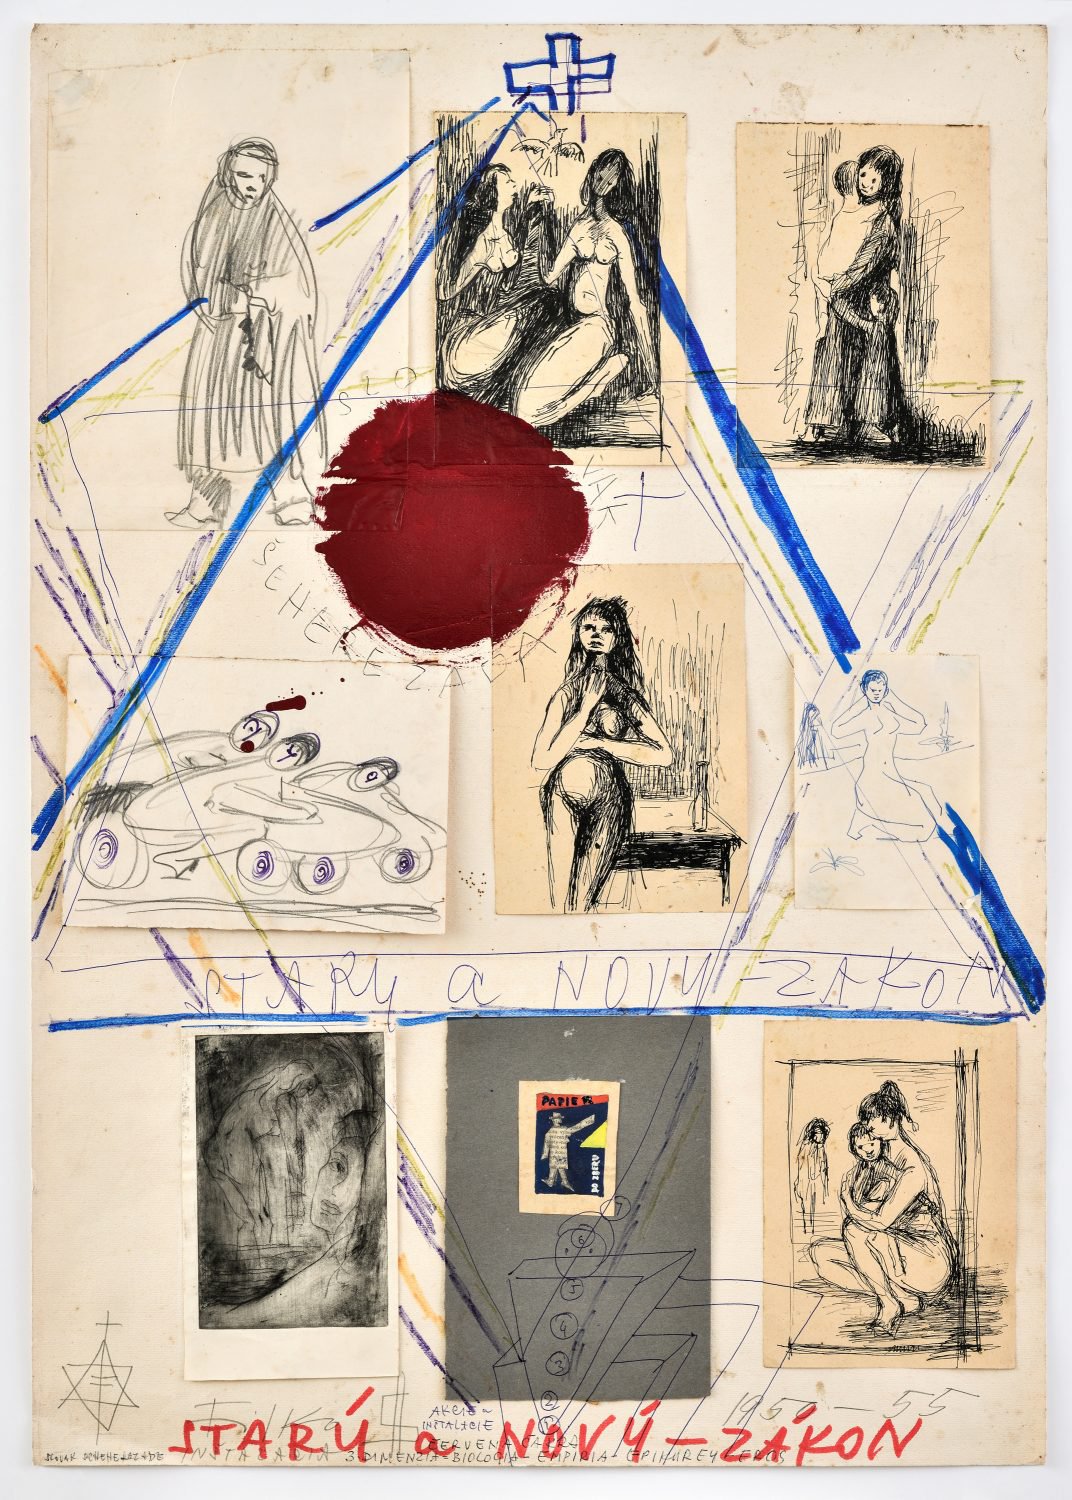 Stano FilkoFrom the cycle Old and New TestamentCollage, painting, felt-tip pen, pencil on paper84.5 x 59.5 cmMULTIMODAL GOOGLIFICATION OF COSMOLOGY-ORIENTED DIAGRAMMATIC EXPERIMENTATIONS OF STANO FILKO, Layr Seilerstaette, Vienna, 2019